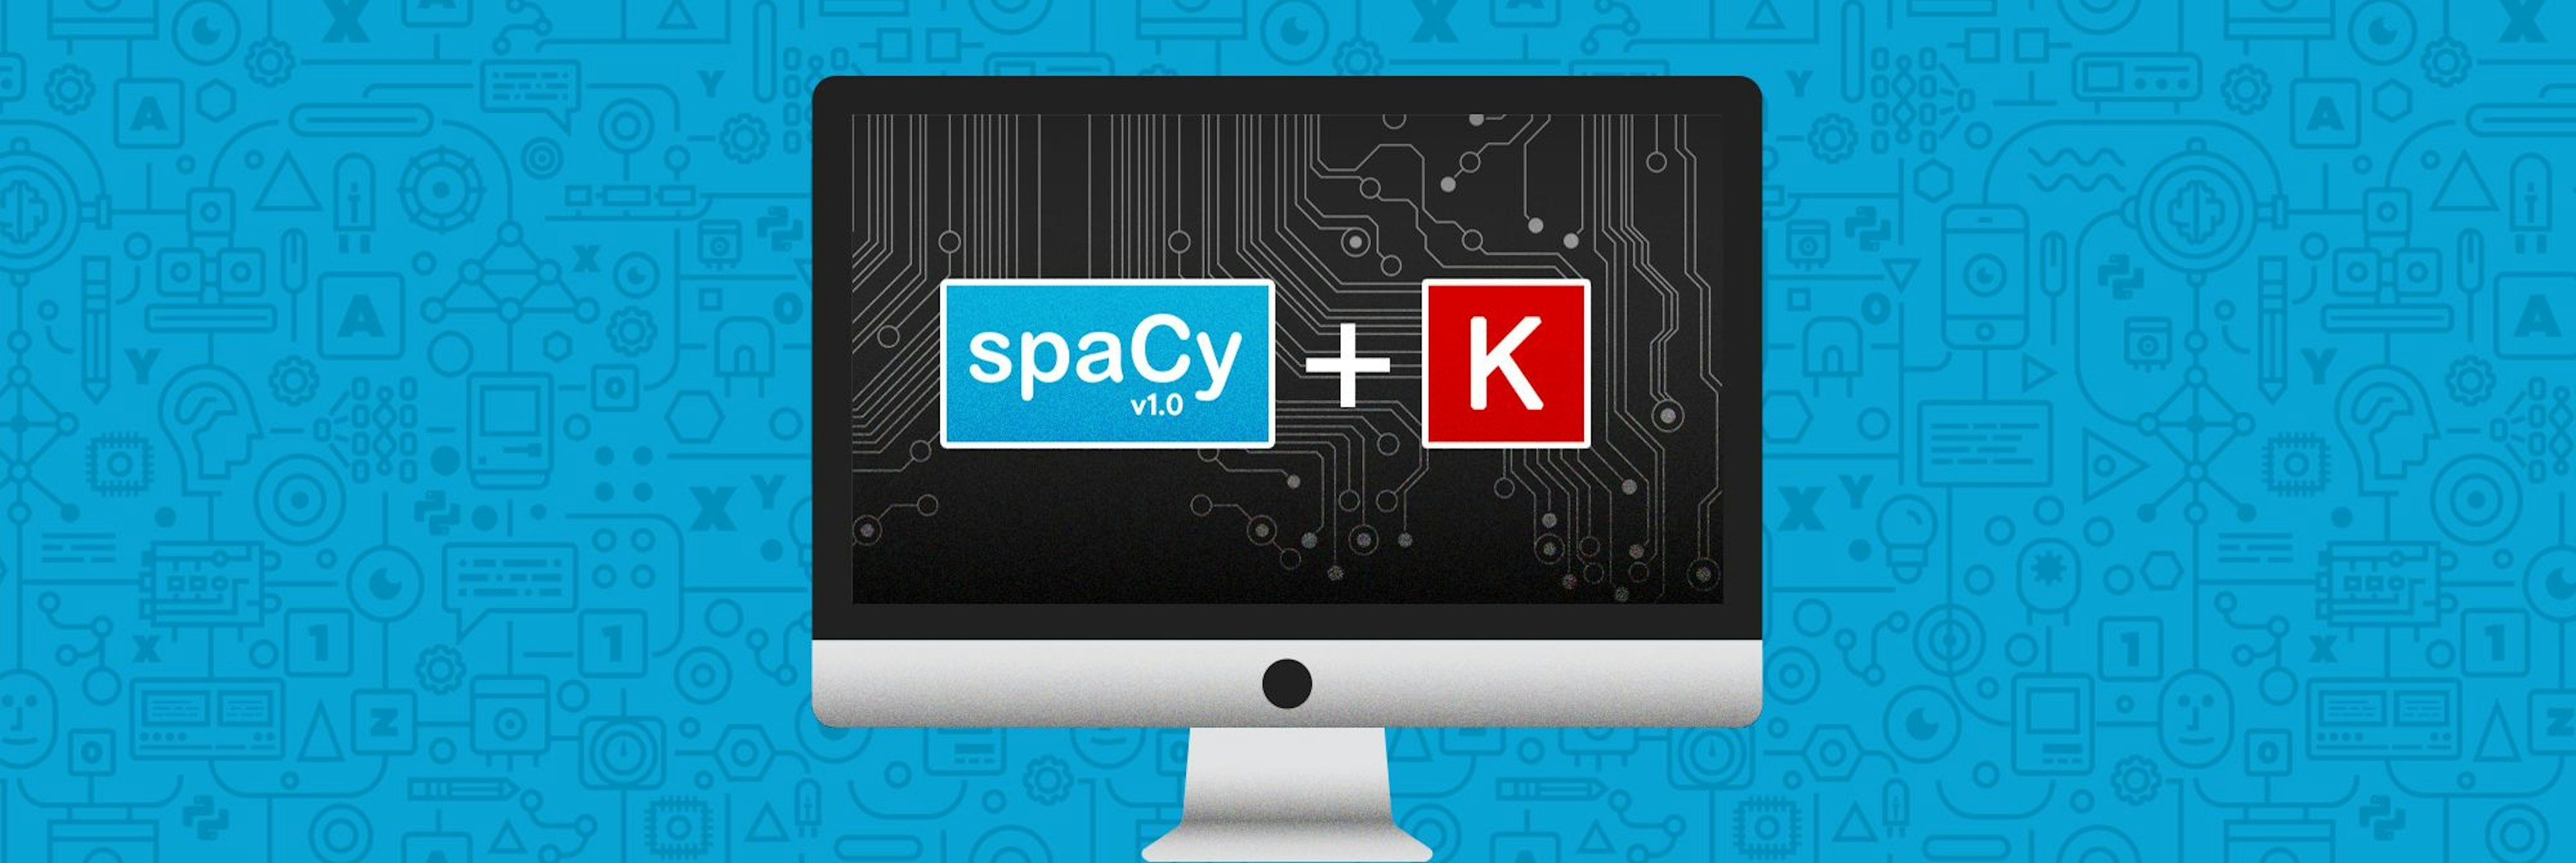 spaCy v1.0: Deep Learning with custom pipelines and Keras